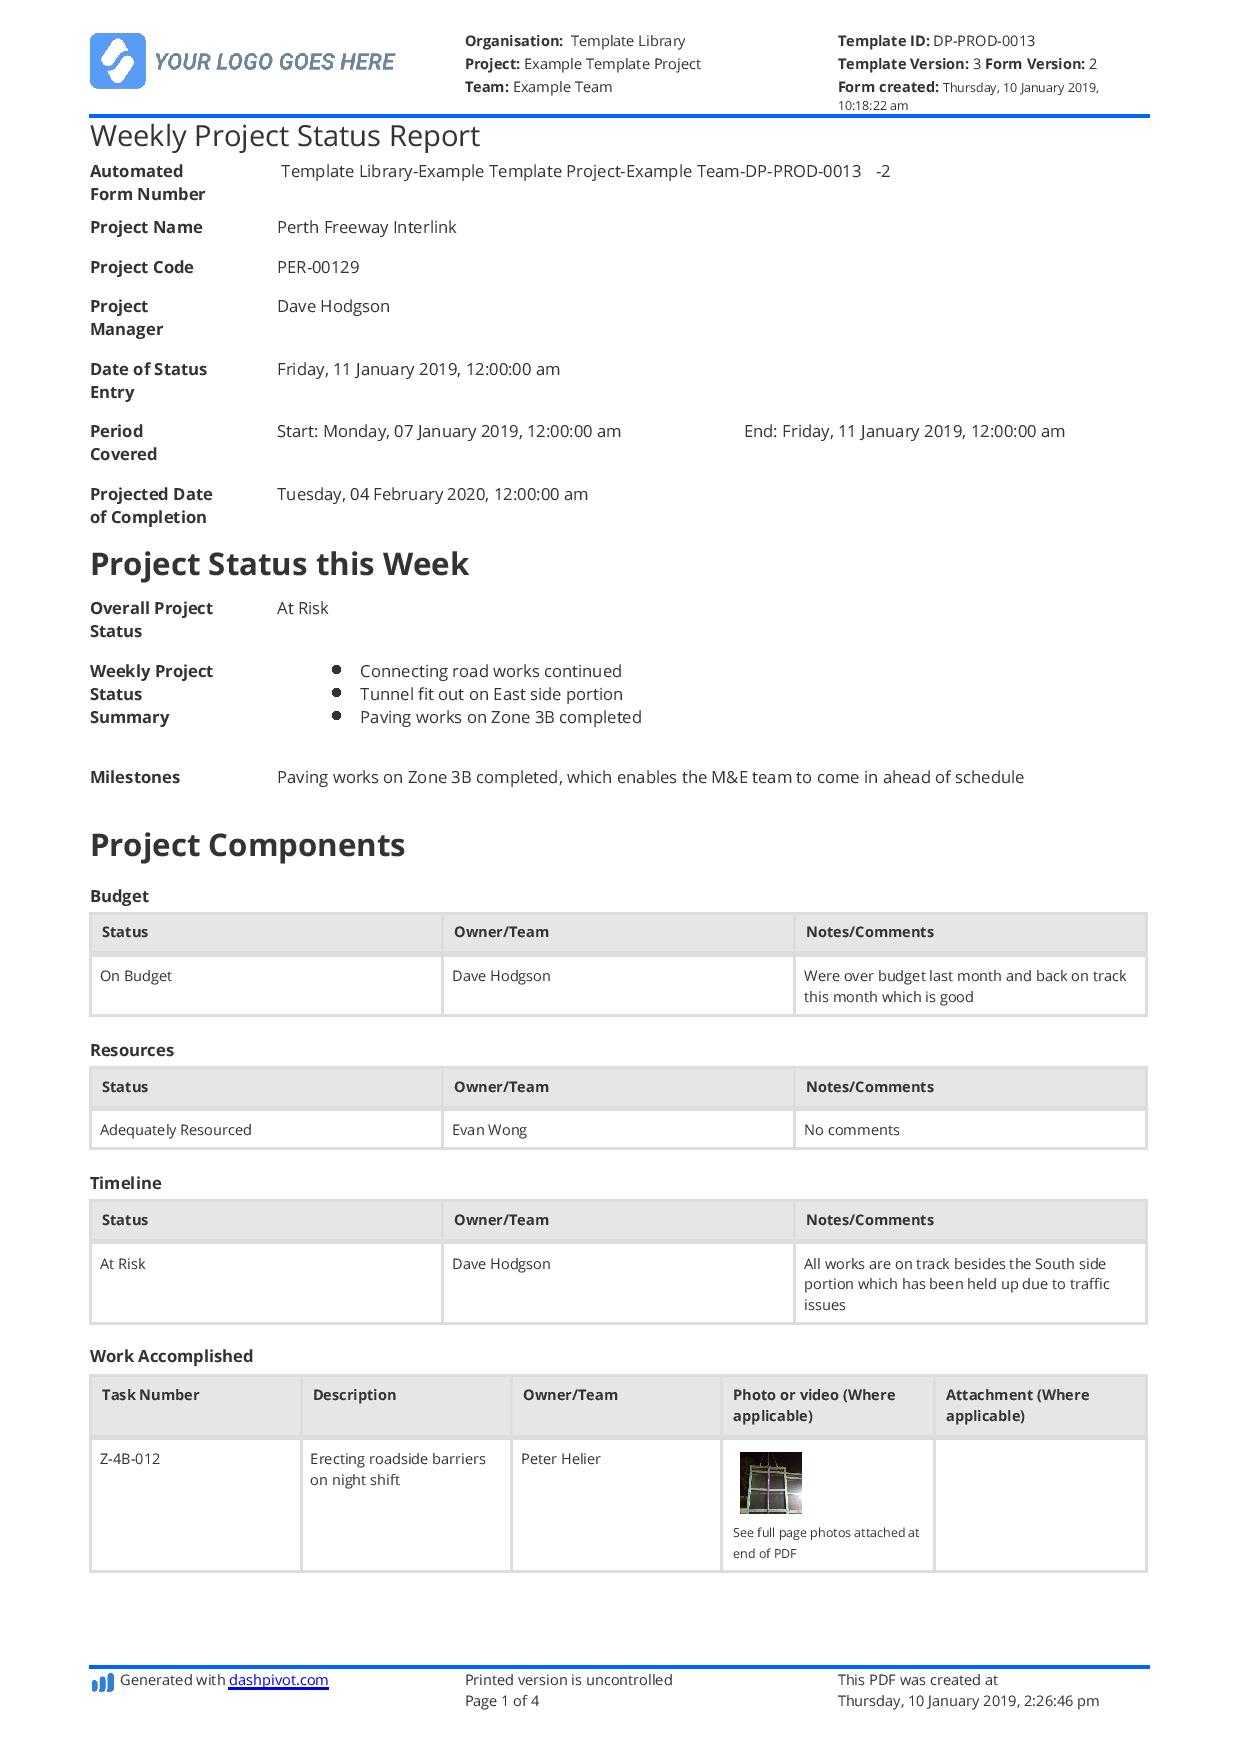 Example Of A Project Status Report To Copy, Use, Download Or In One Page Project Status Report Template